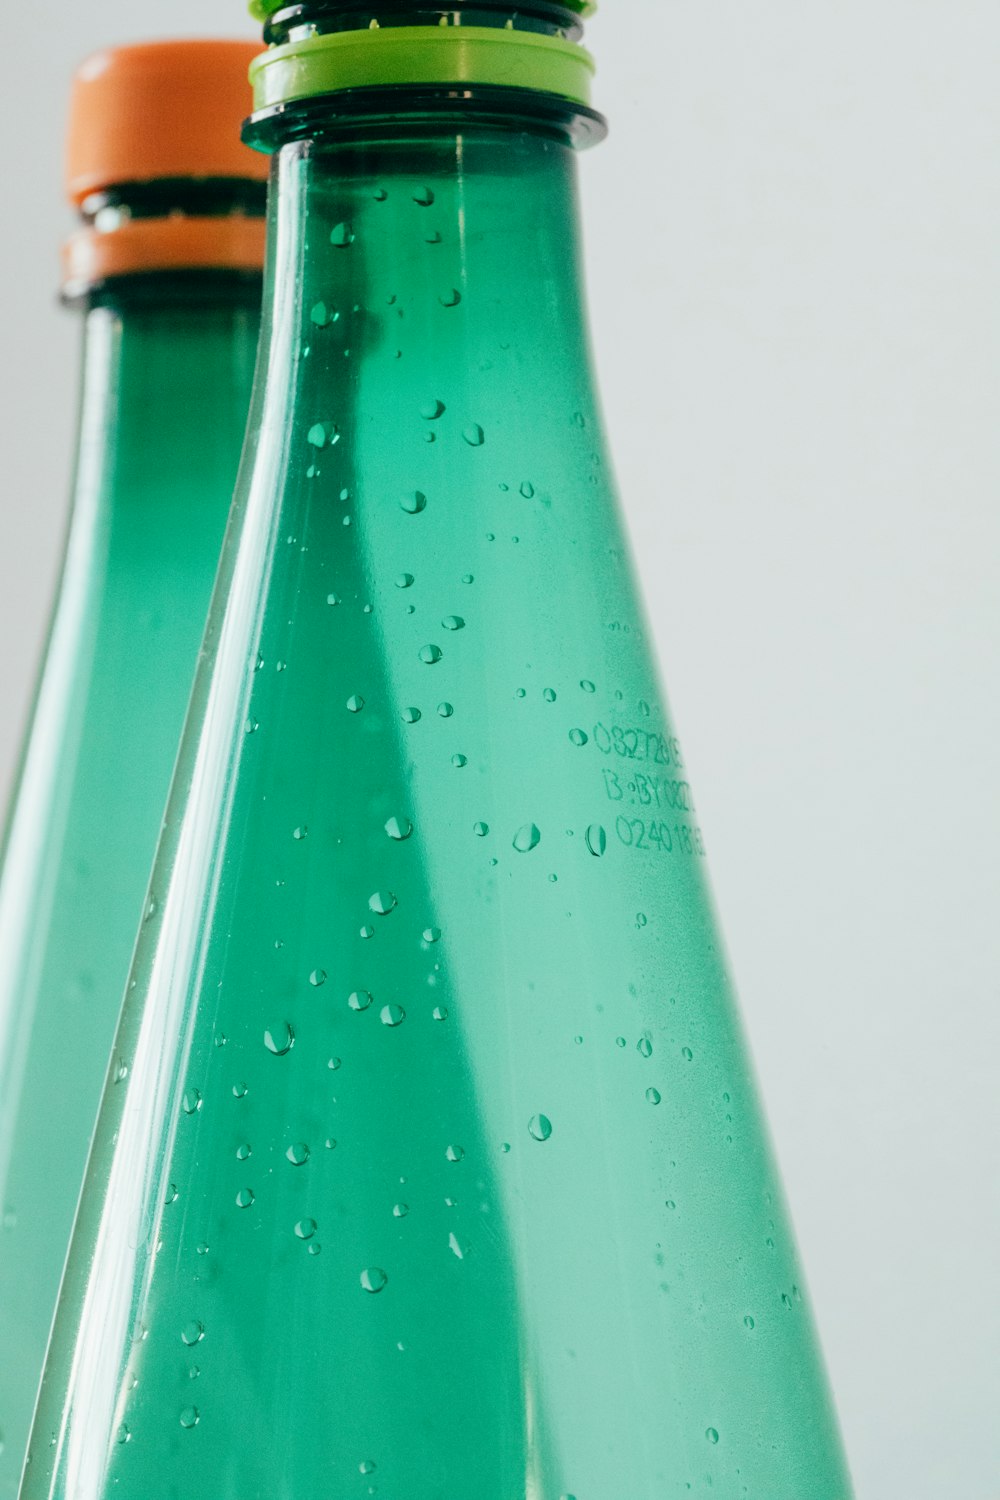 teal and brown bottle with white background